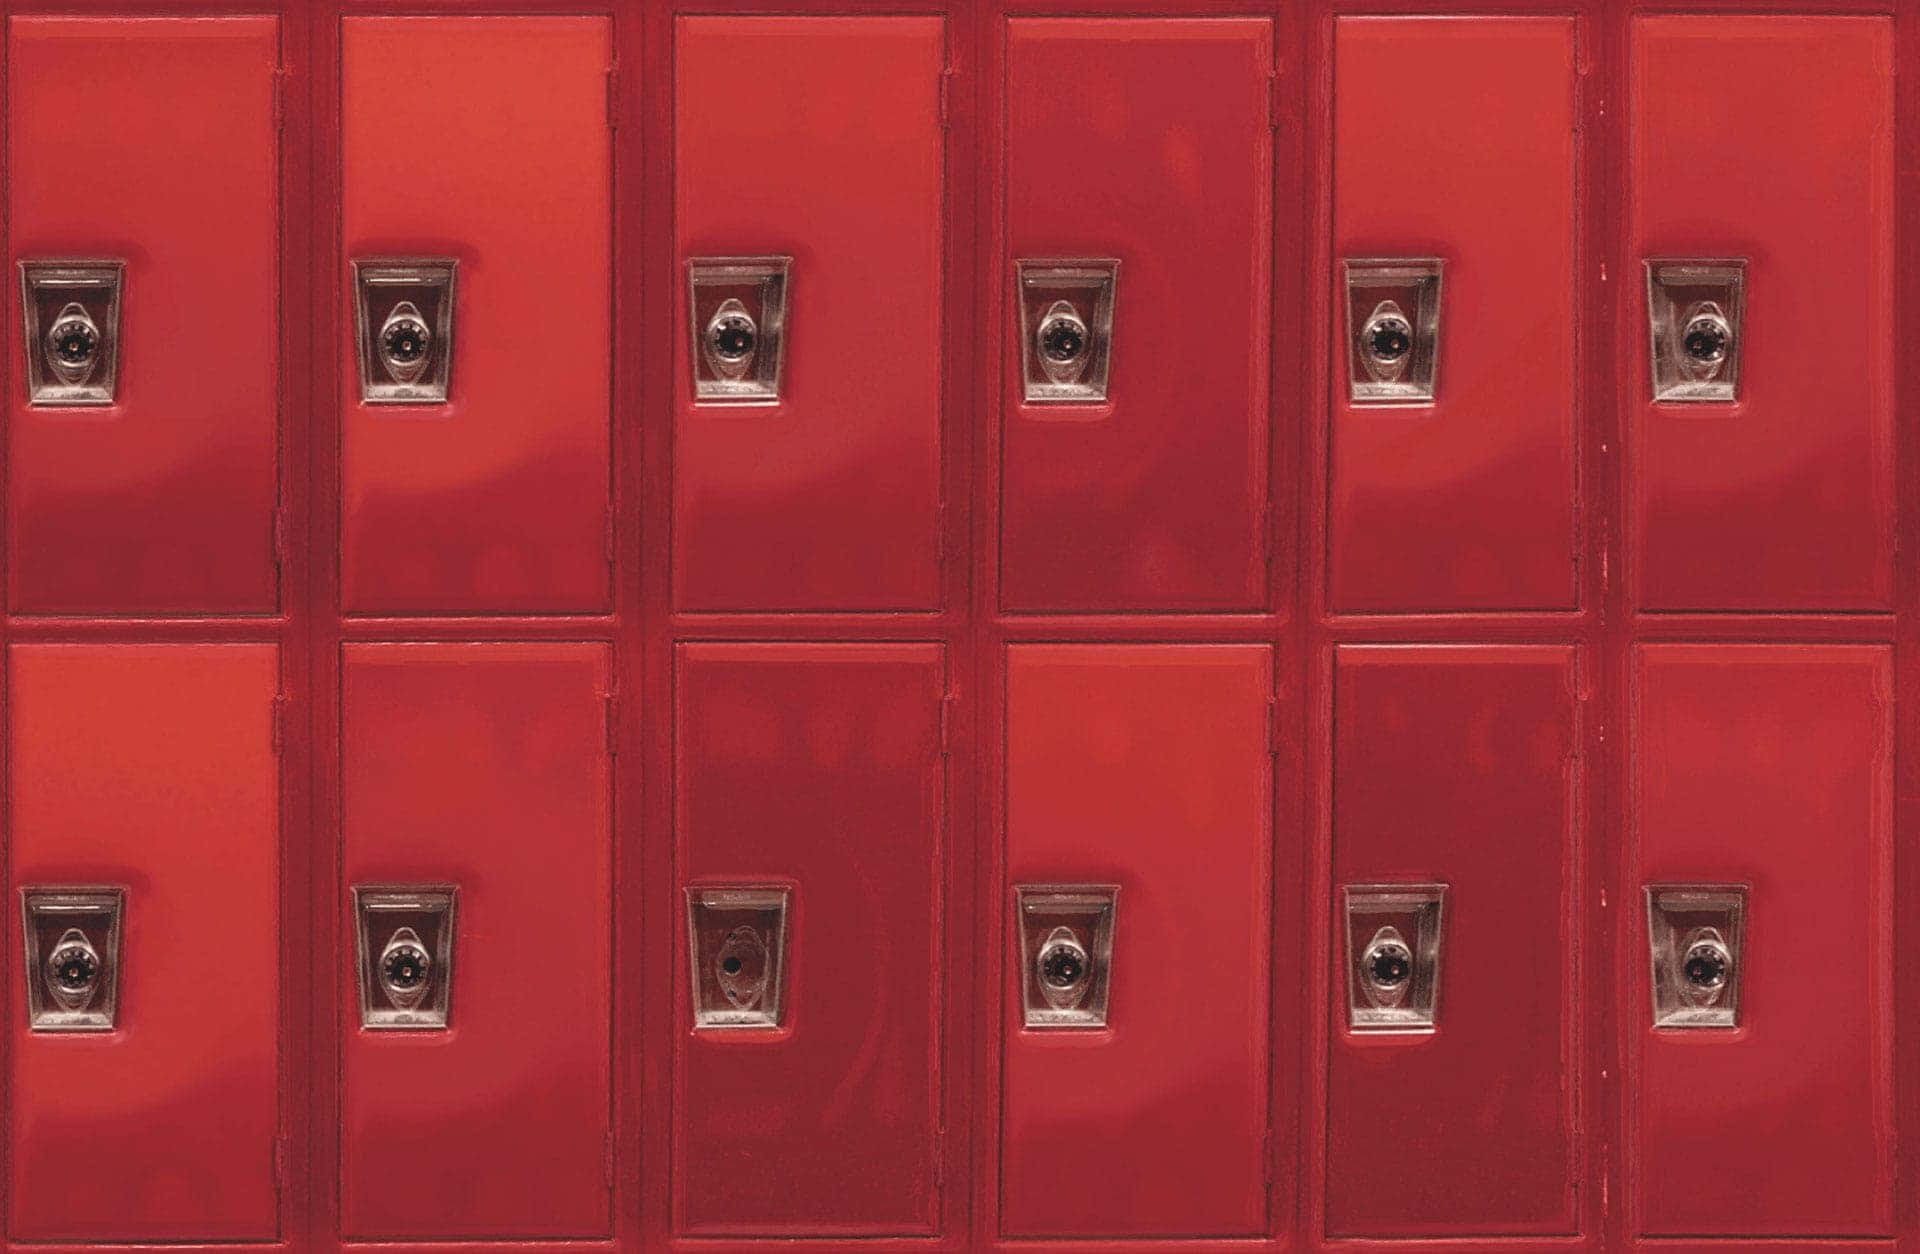 Red Lockers With Metal Handles And Knobs